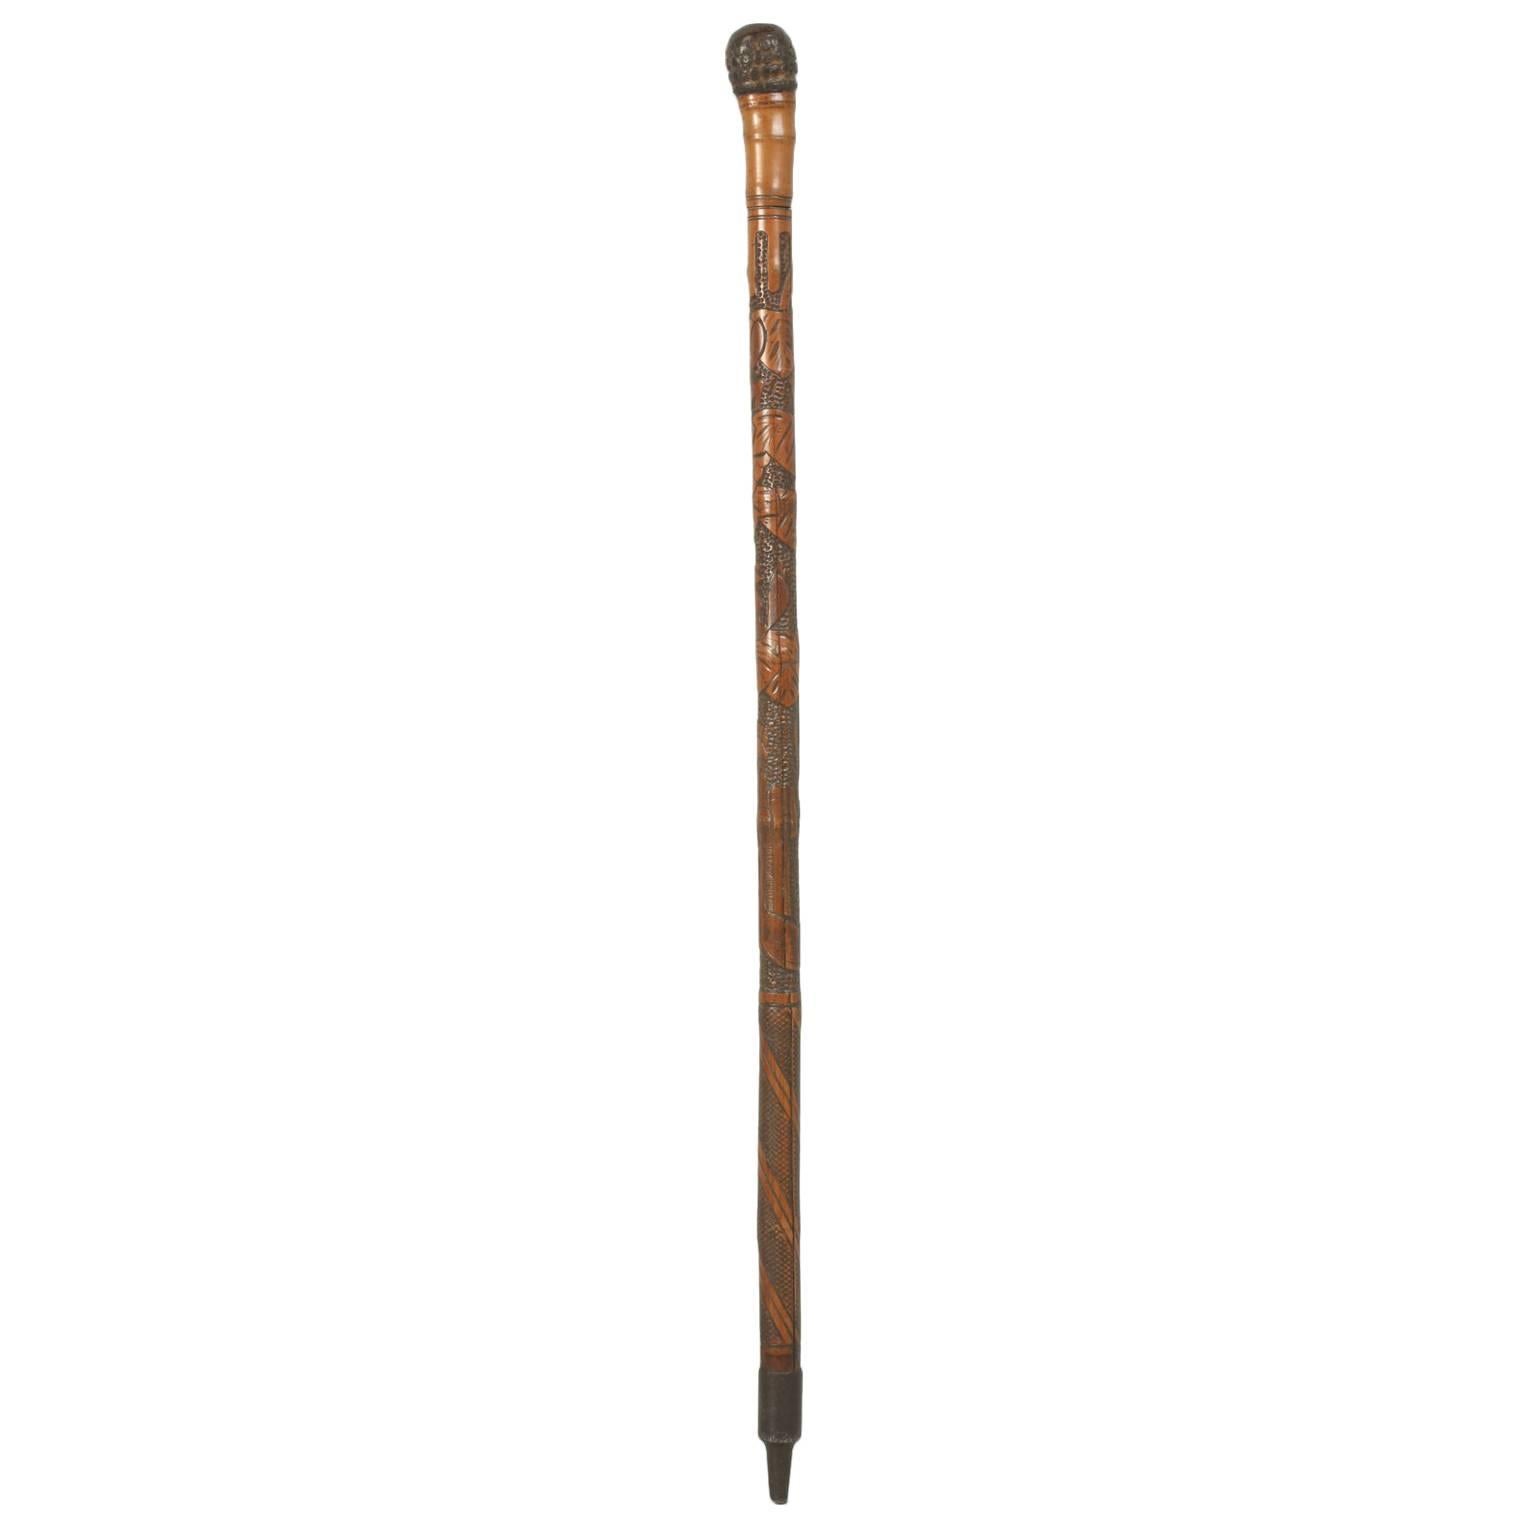 Antique Walking Stick or Cane That Has a Hidden Large Sword Inside